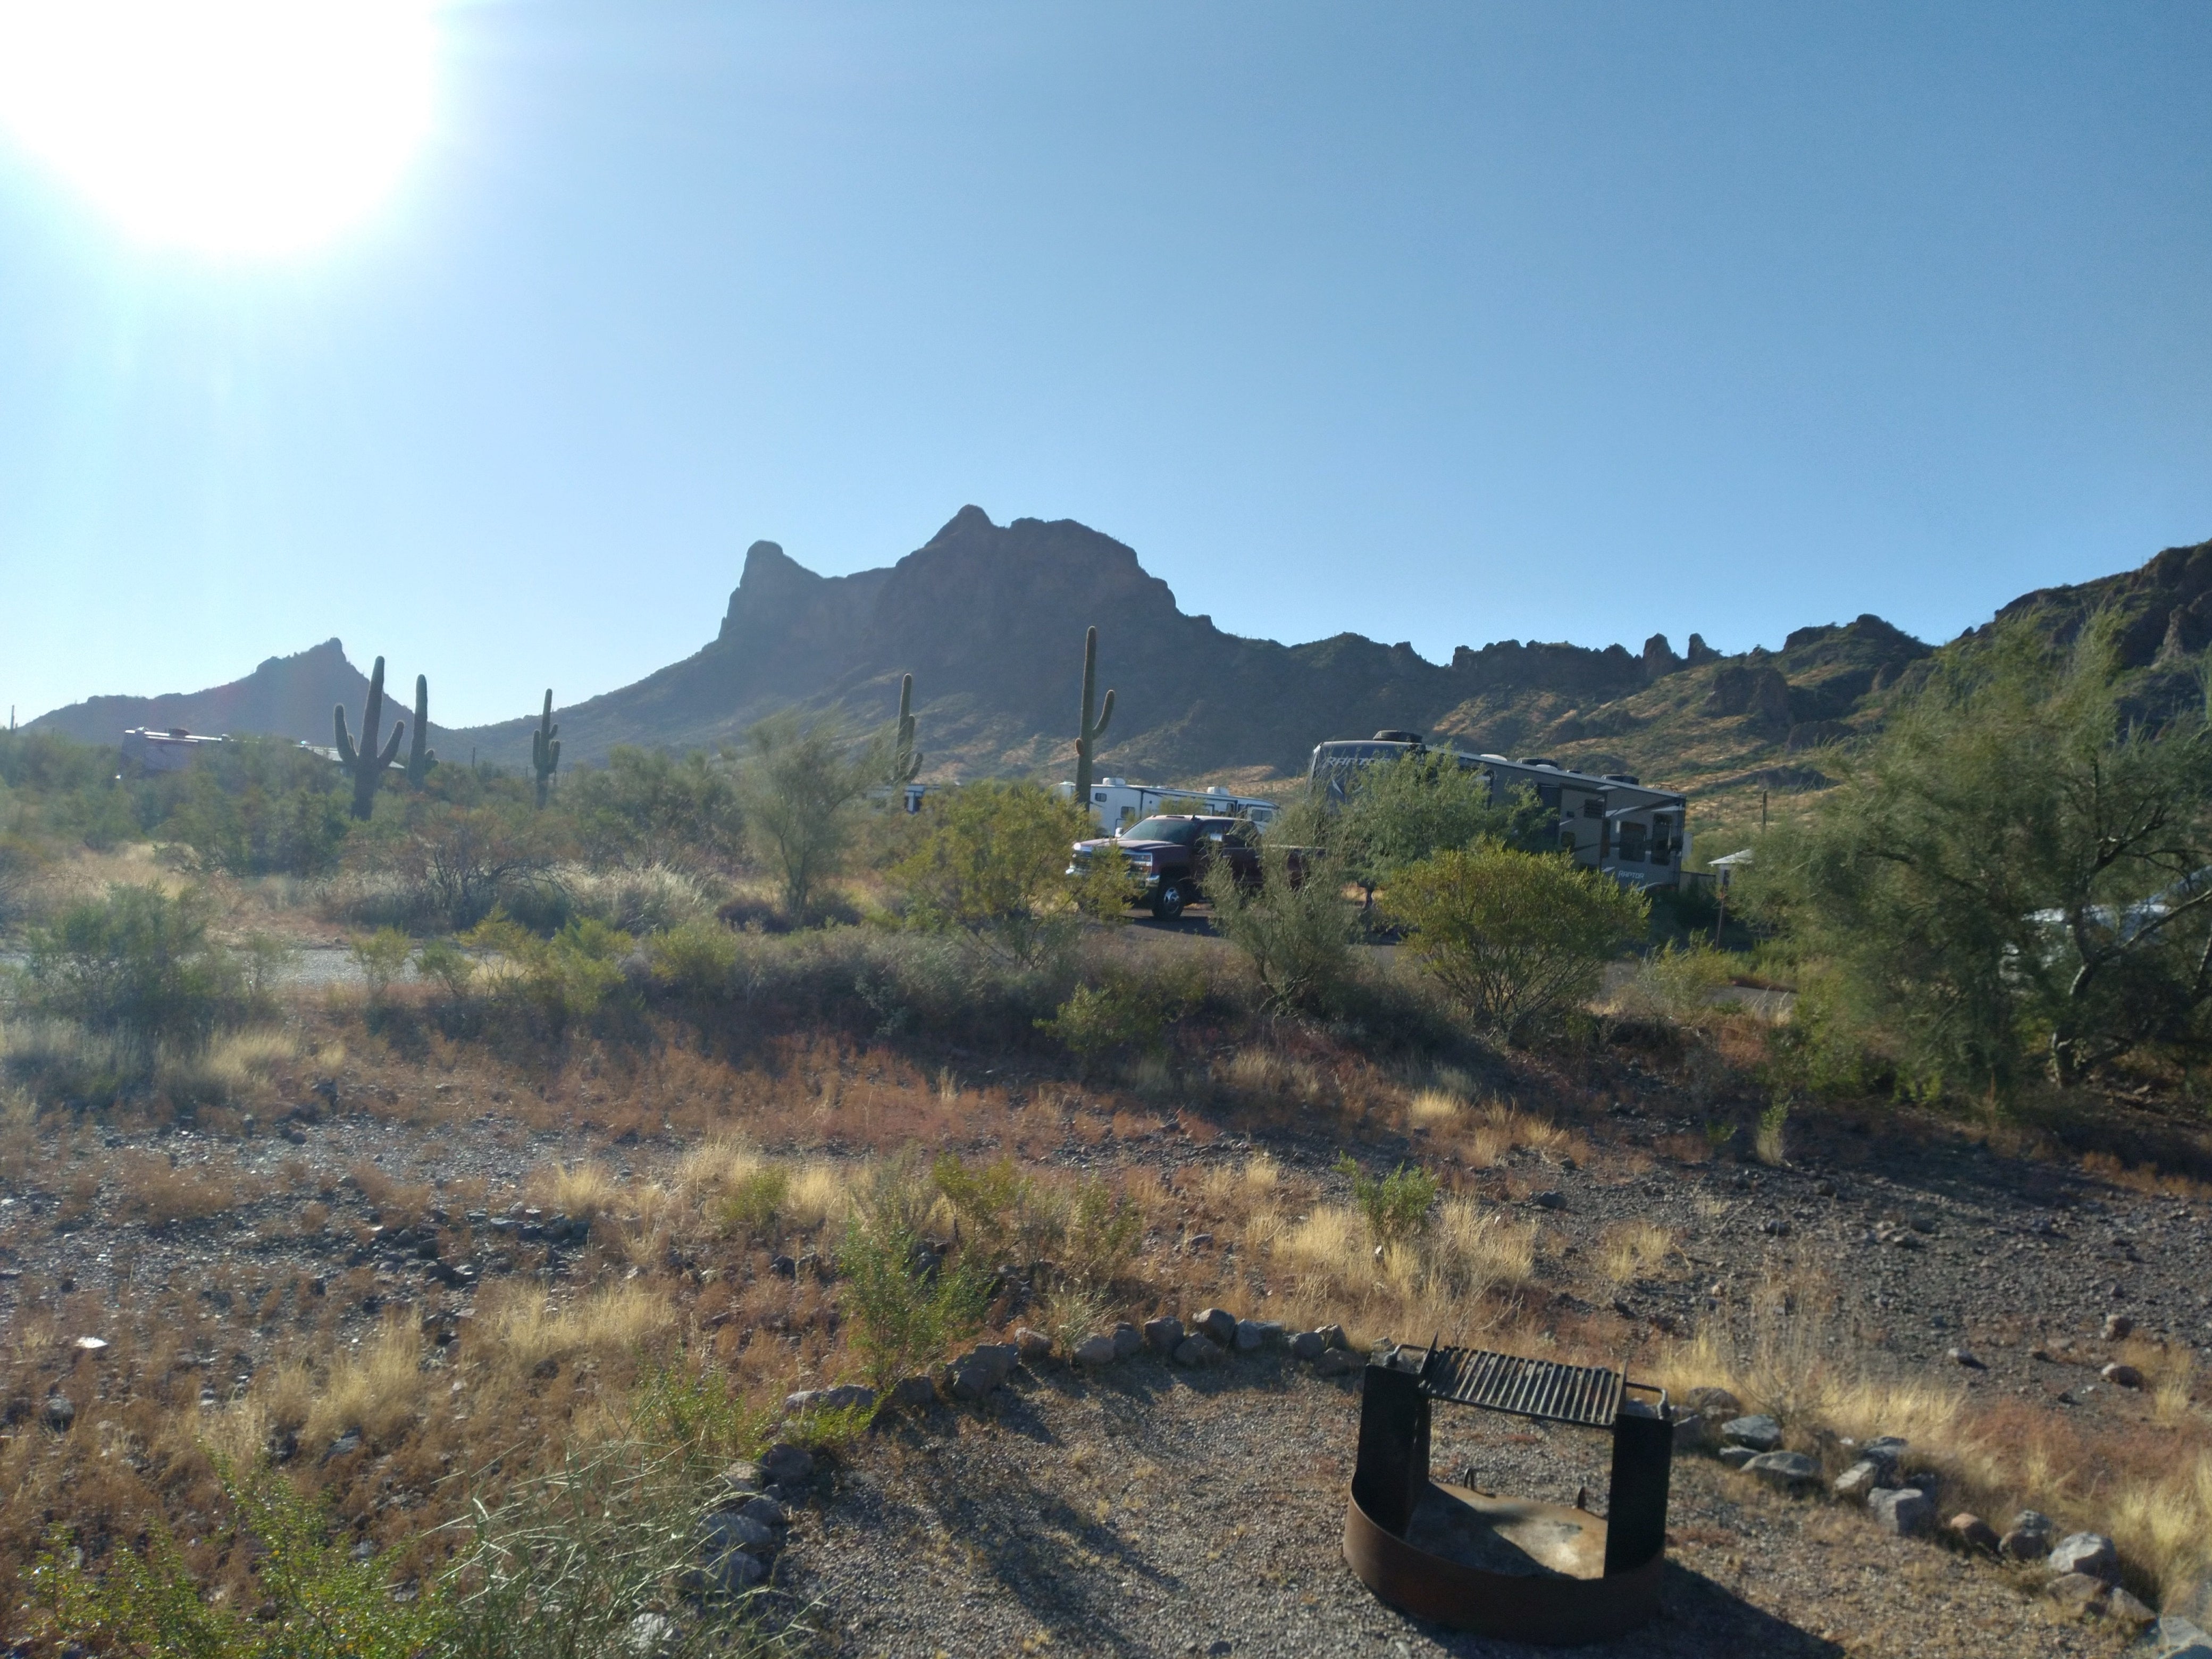 Camper submitted image from Picacho Peak State Park - 1